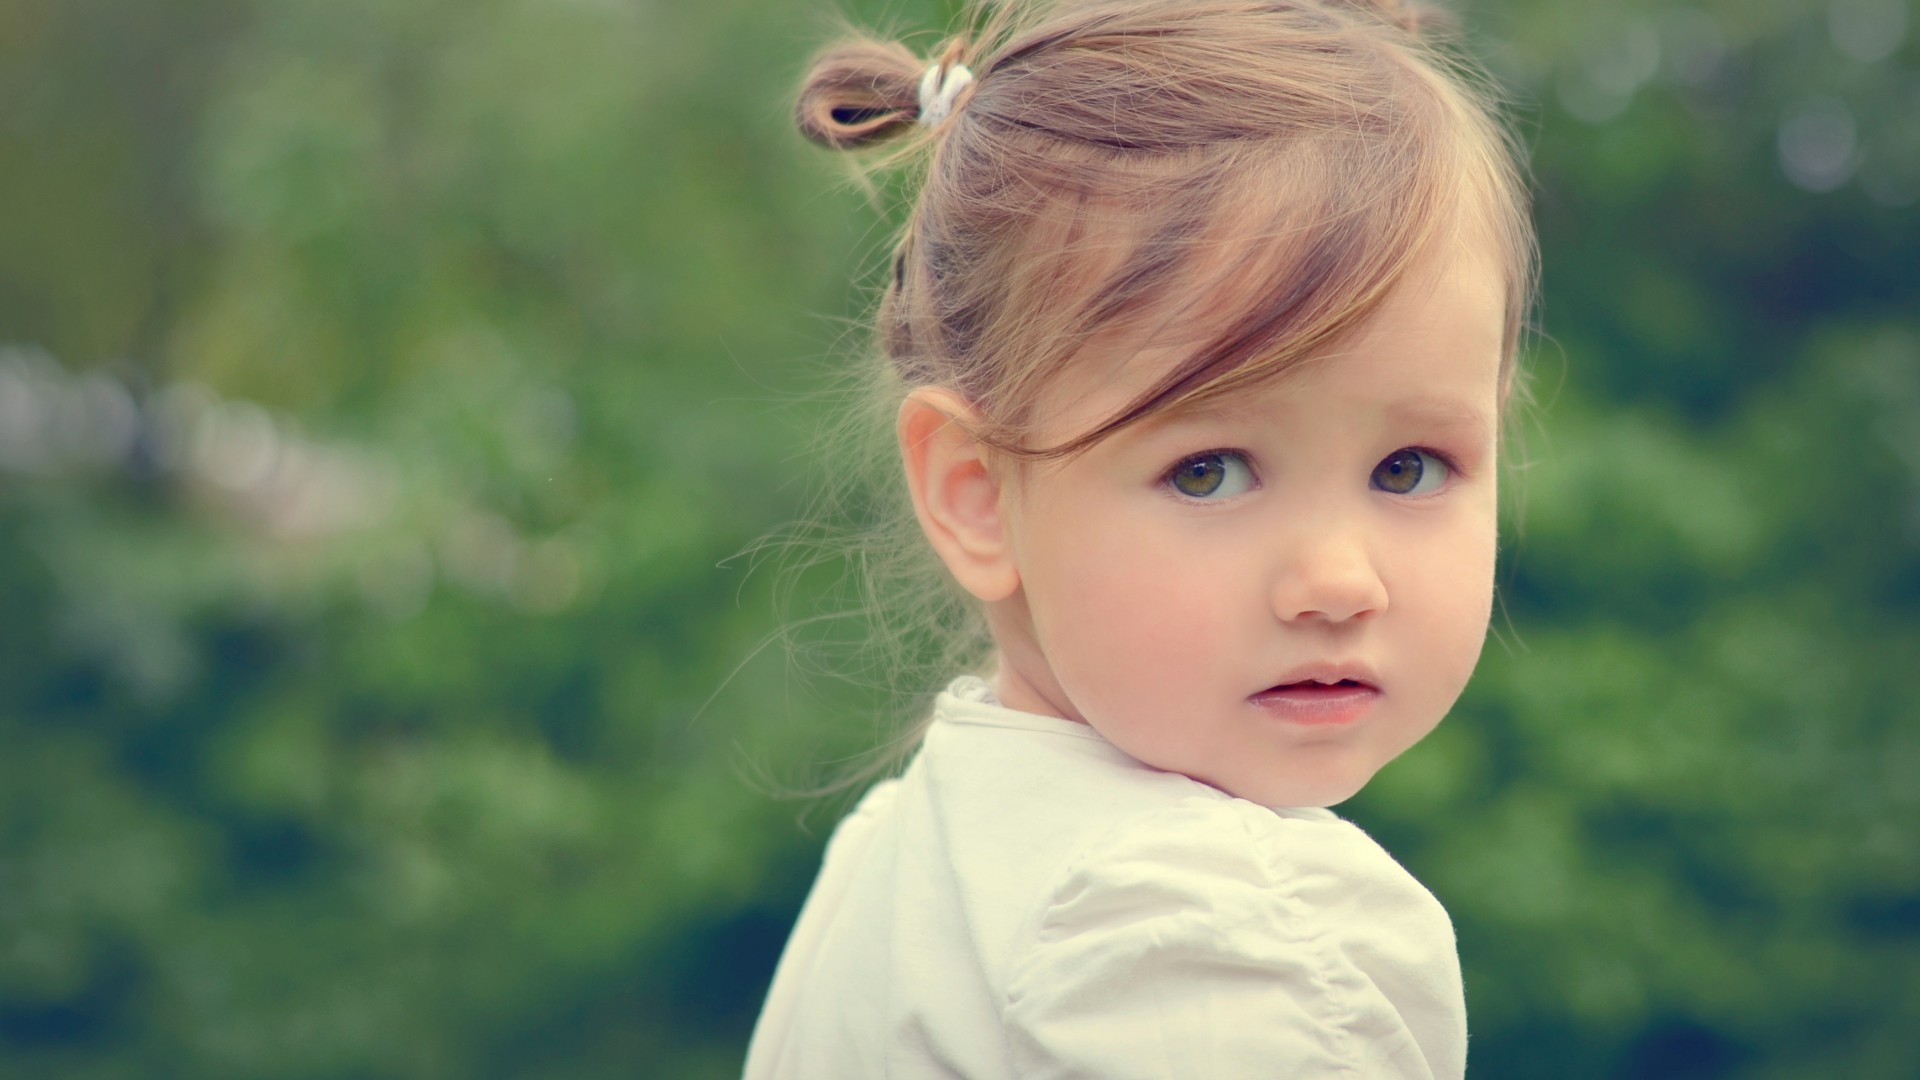 People 1920x1080 children baby face